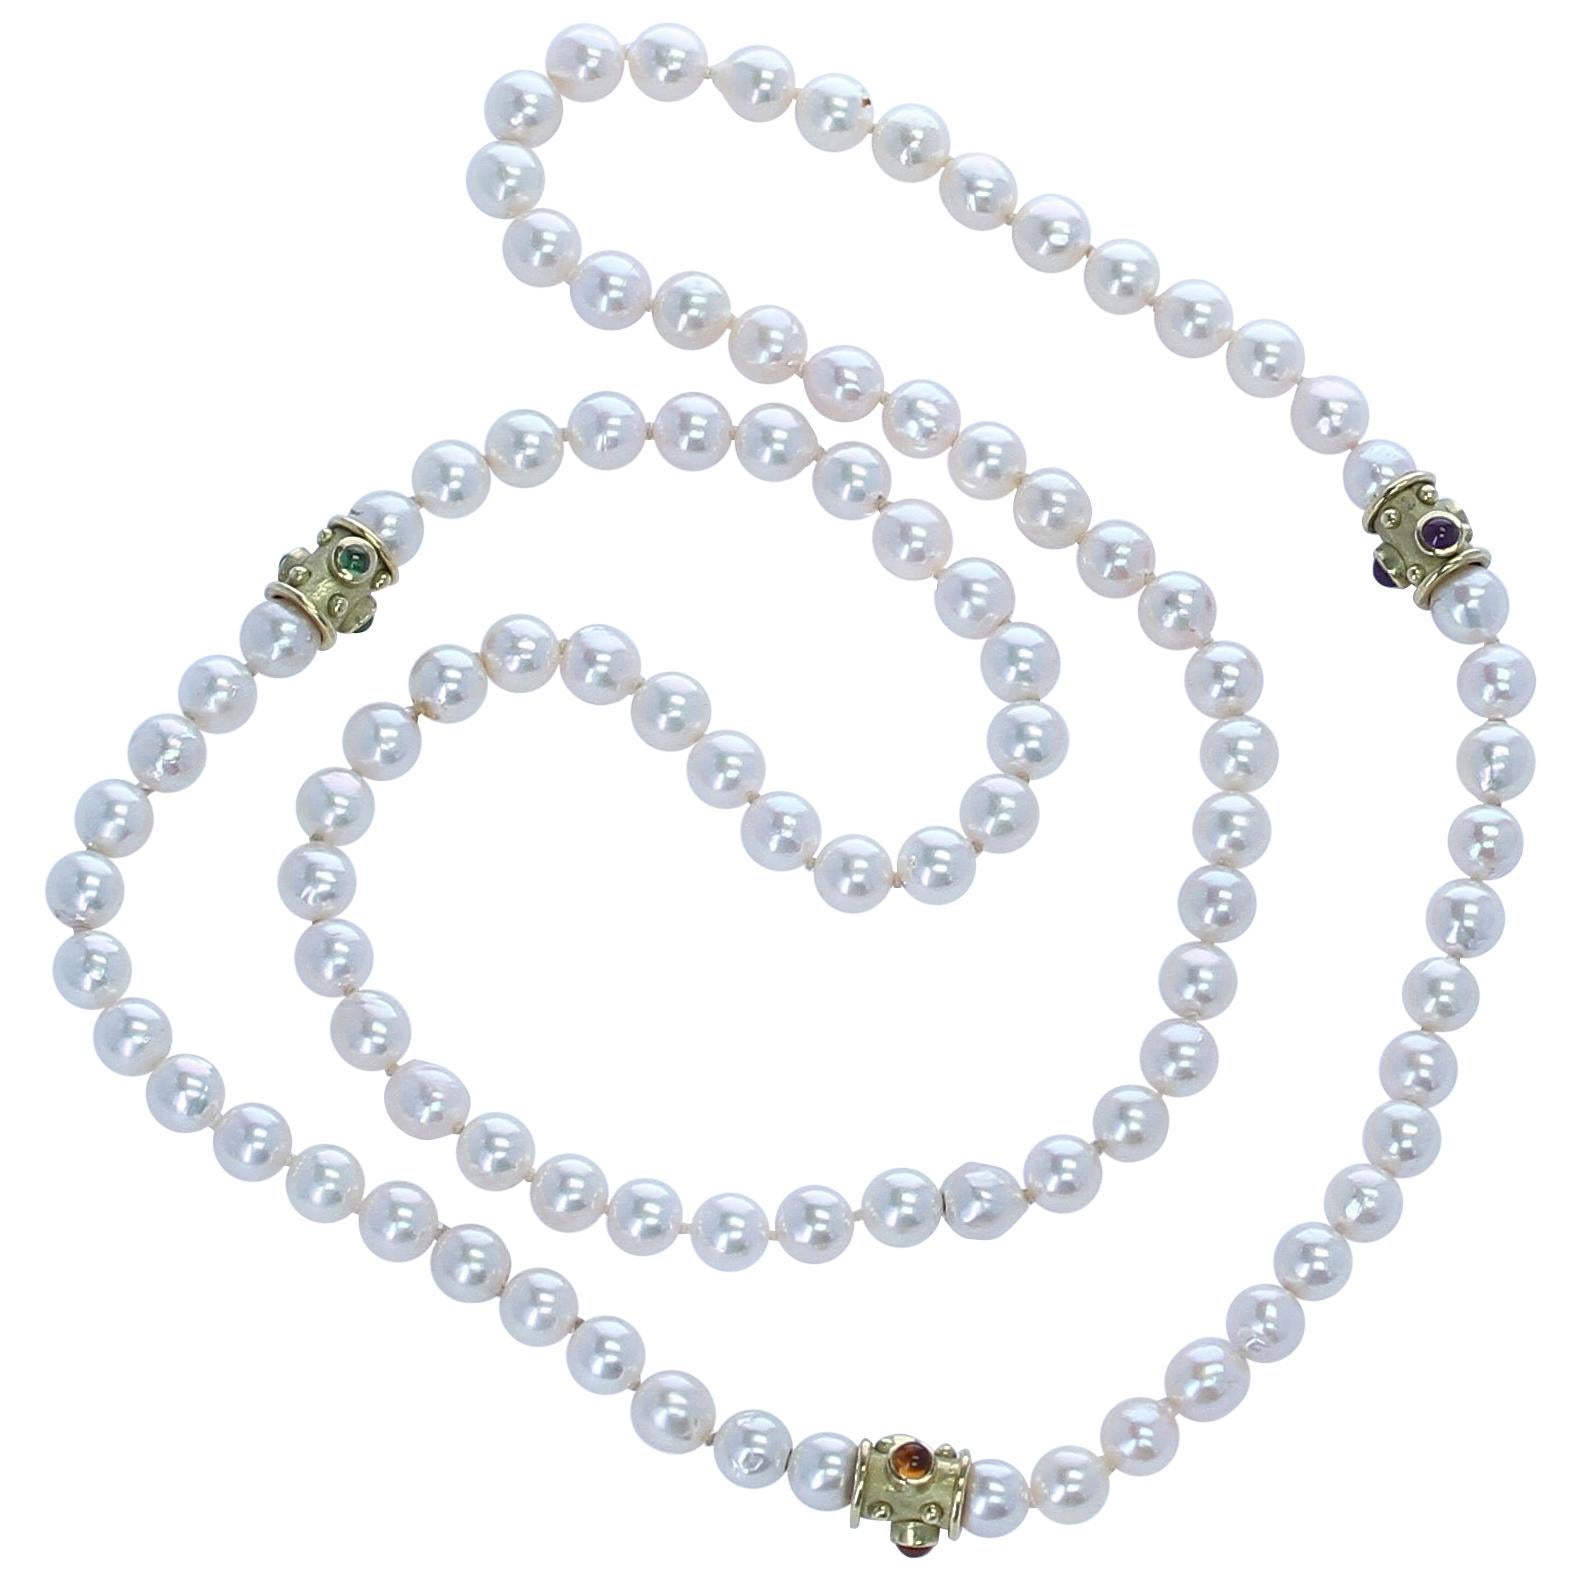 Pearl Necklace with Gold and Peridot, Citrine, and Amethyst Cabochons